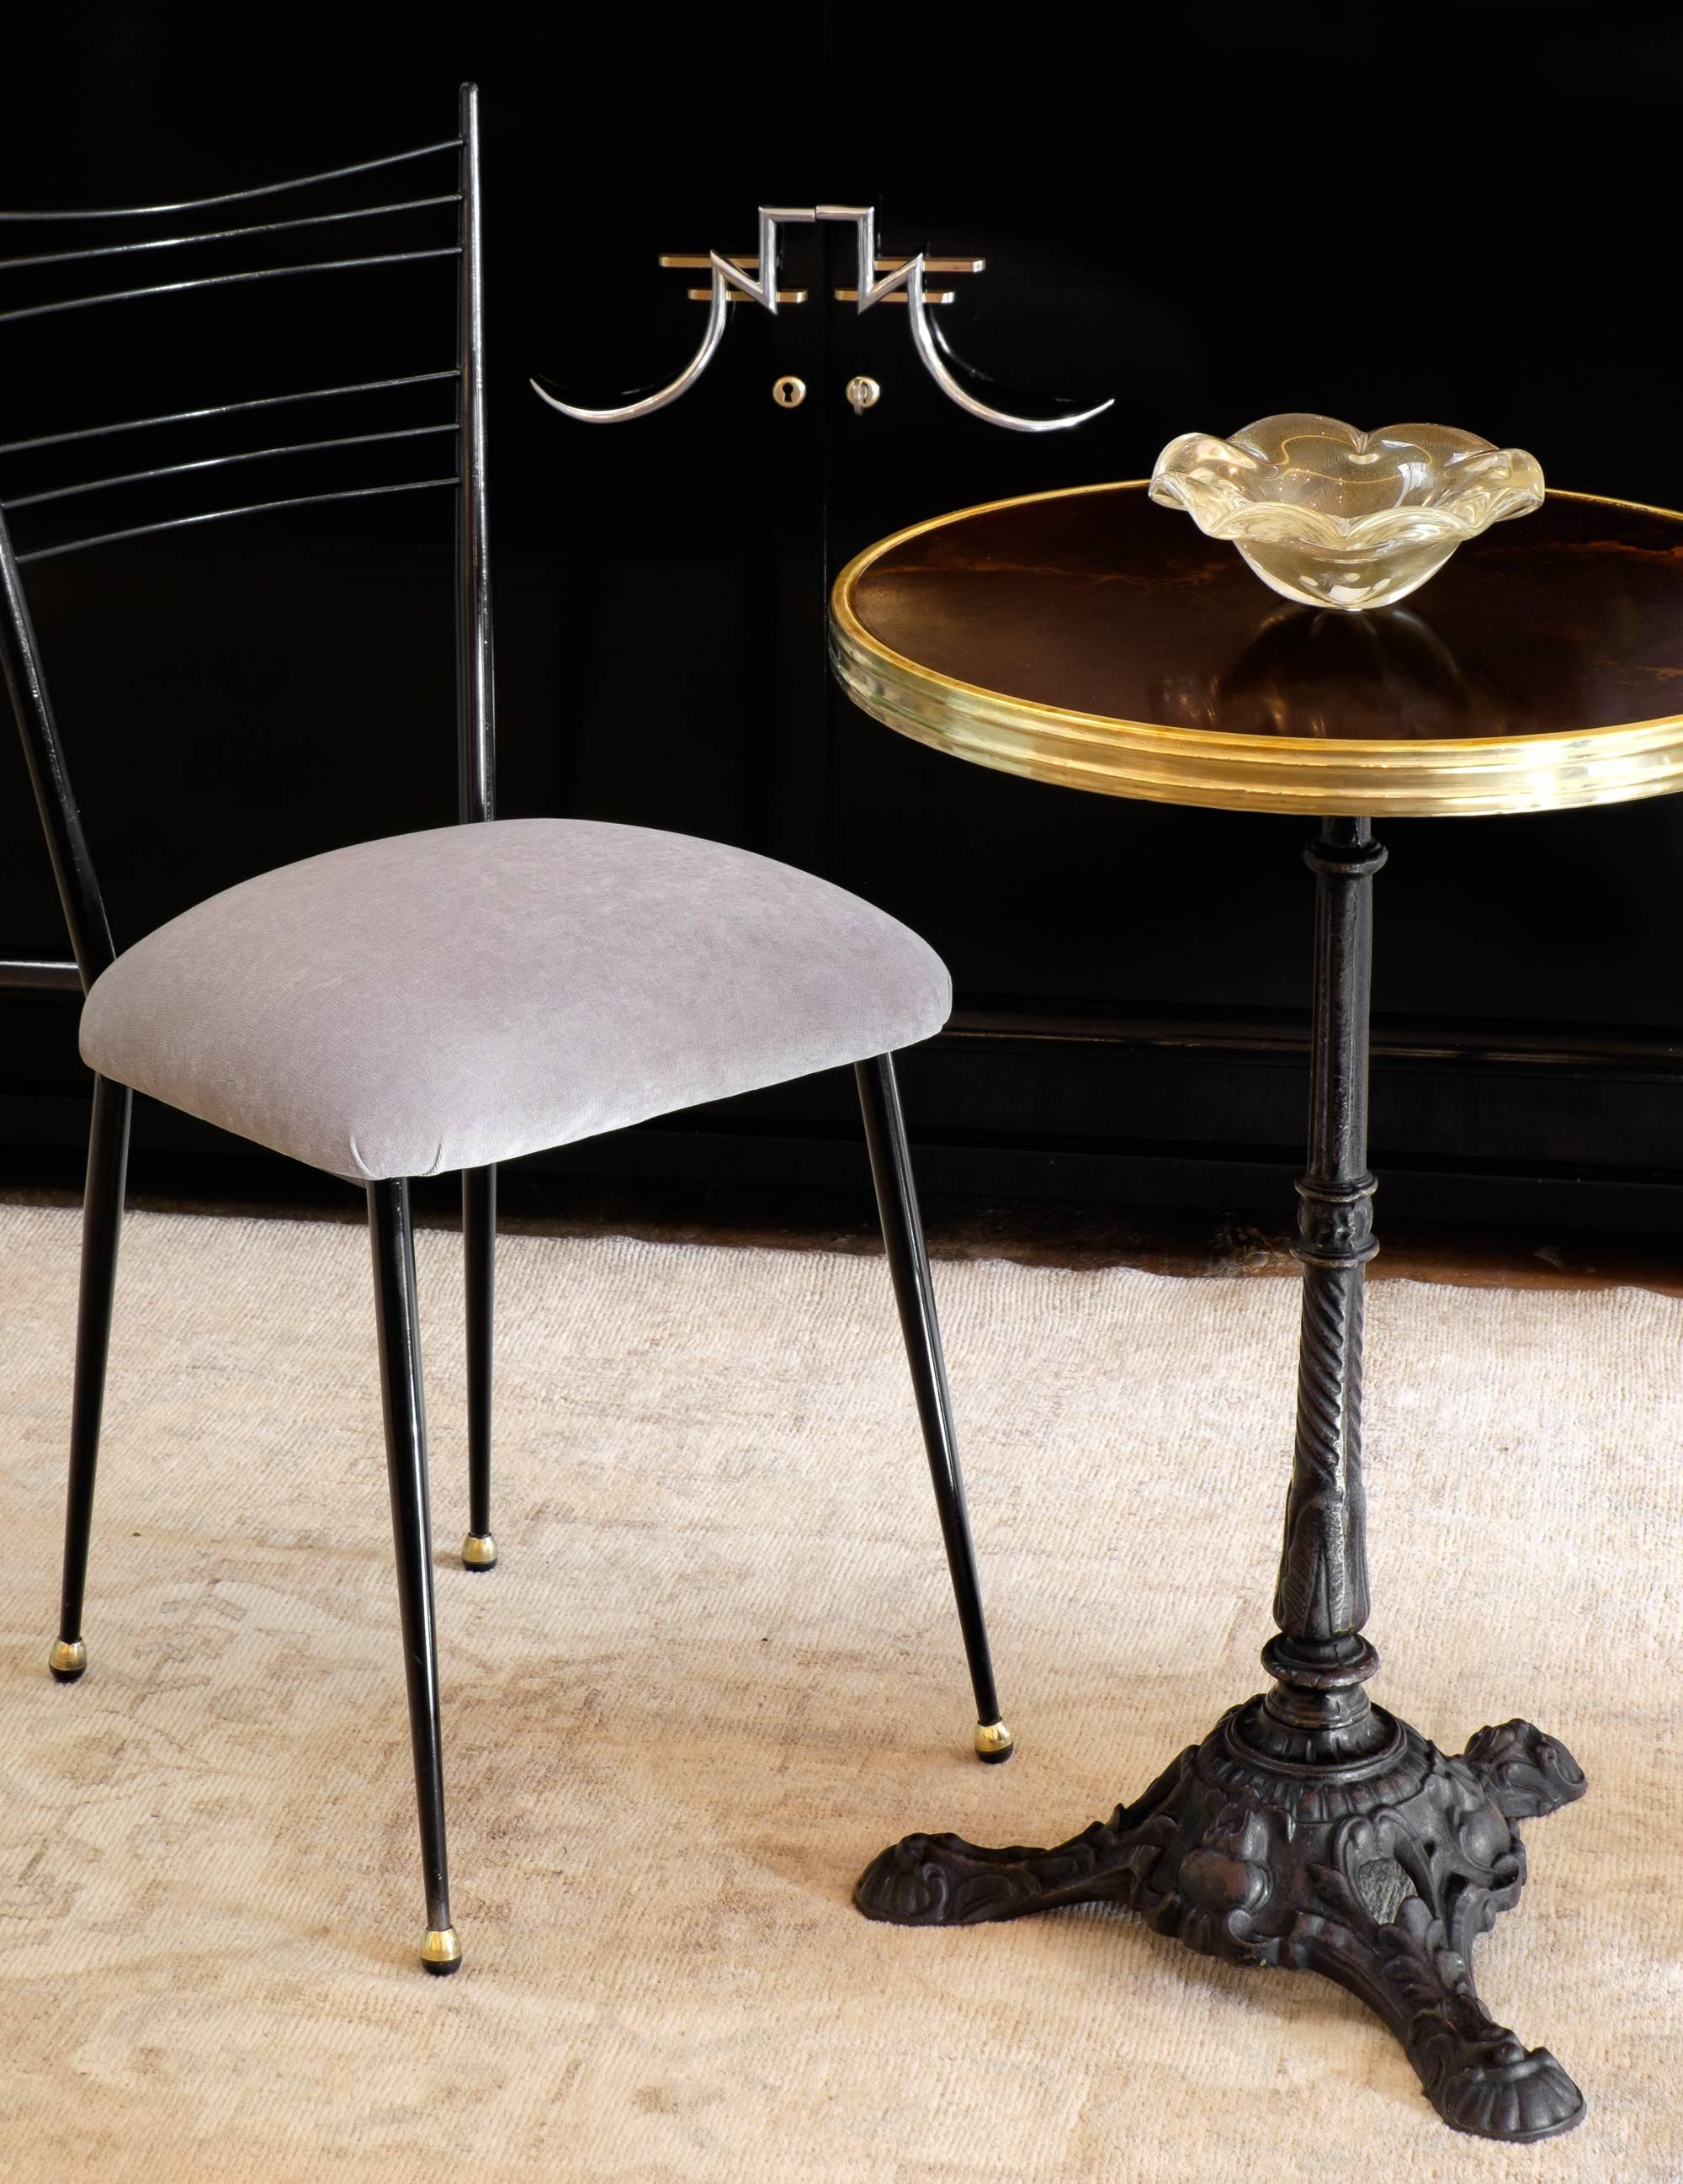 French antique bistro table with a beautiful cast iron base, Altuglas top with brass trim. We loved the perfect condition of this iconic Parisian bistro table.
A second, matching table is also available.